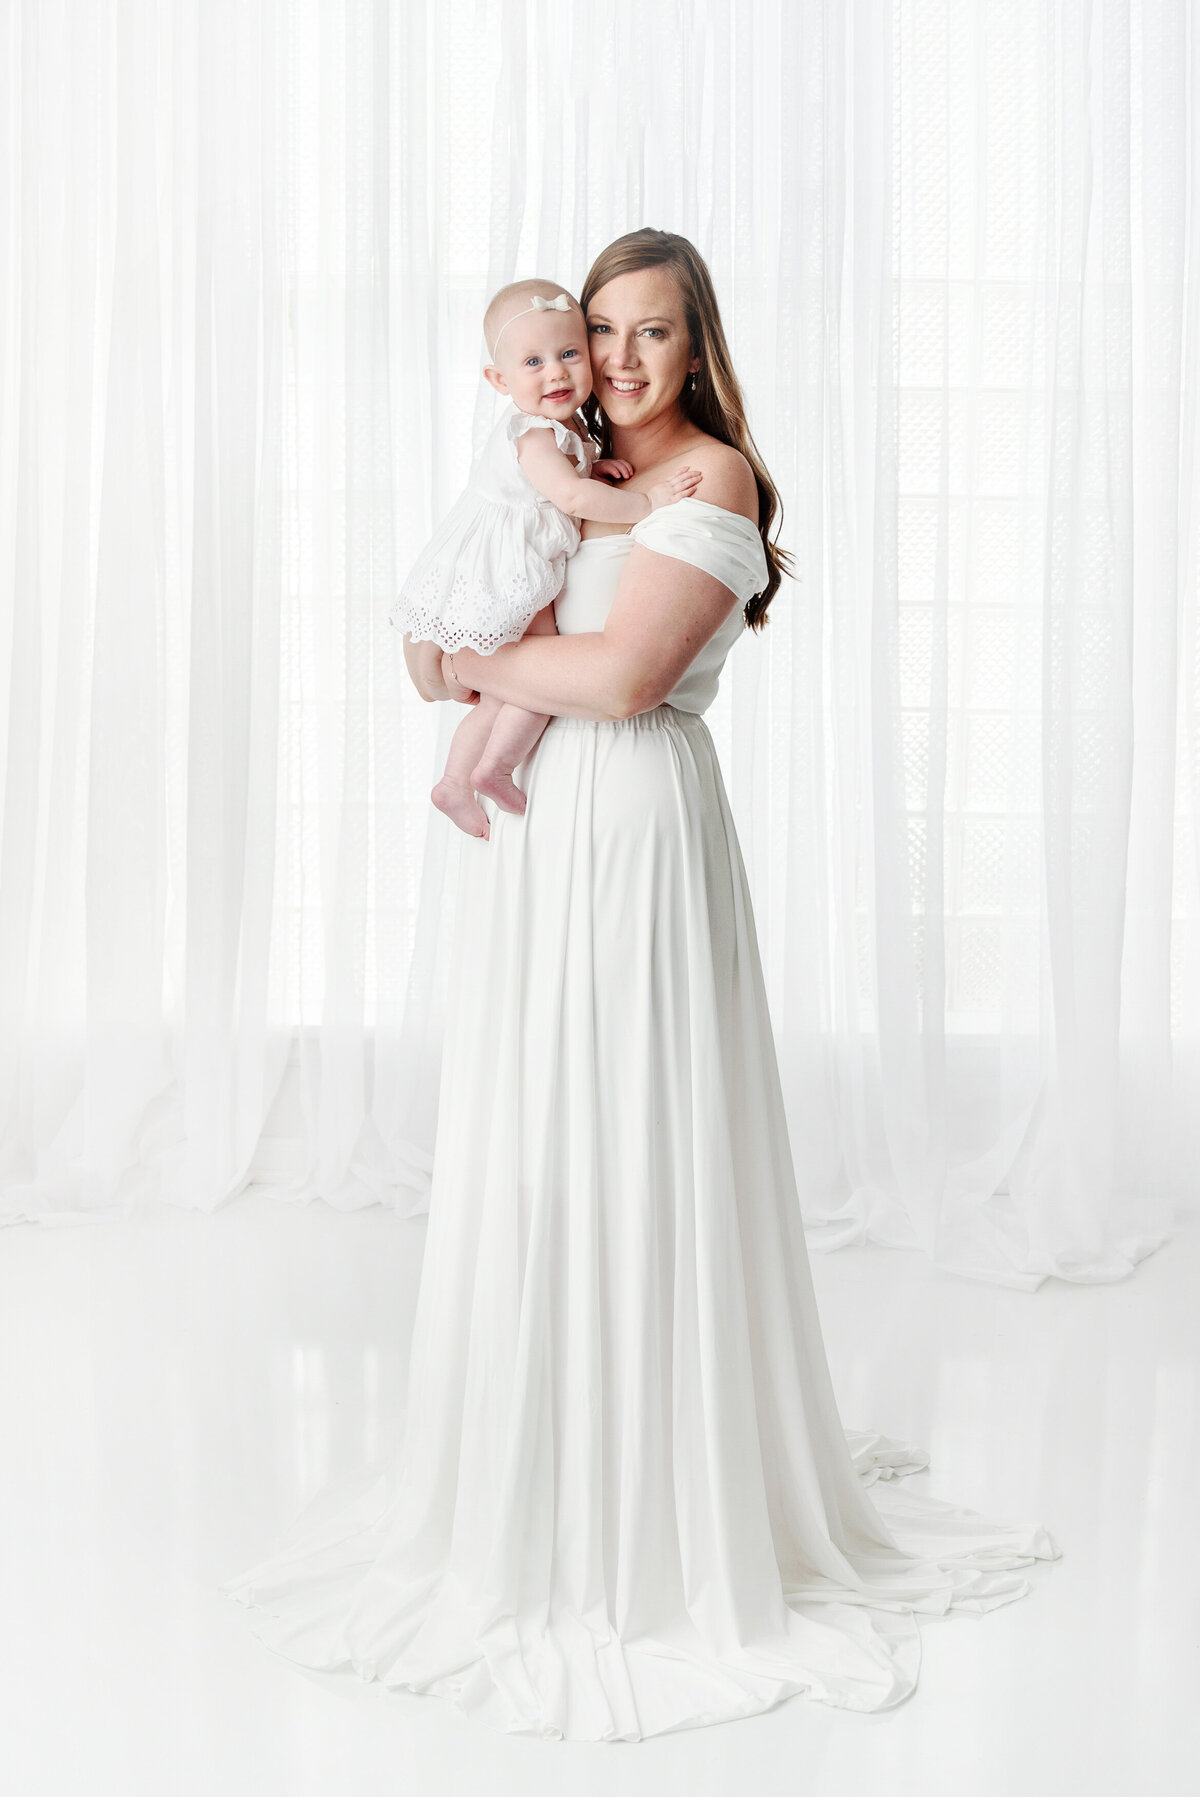 st-louis-motherhood-photographer-mother-holding-baby-both-smiling-at-camera-wearing-monocromatic-white-growns-against-white-background